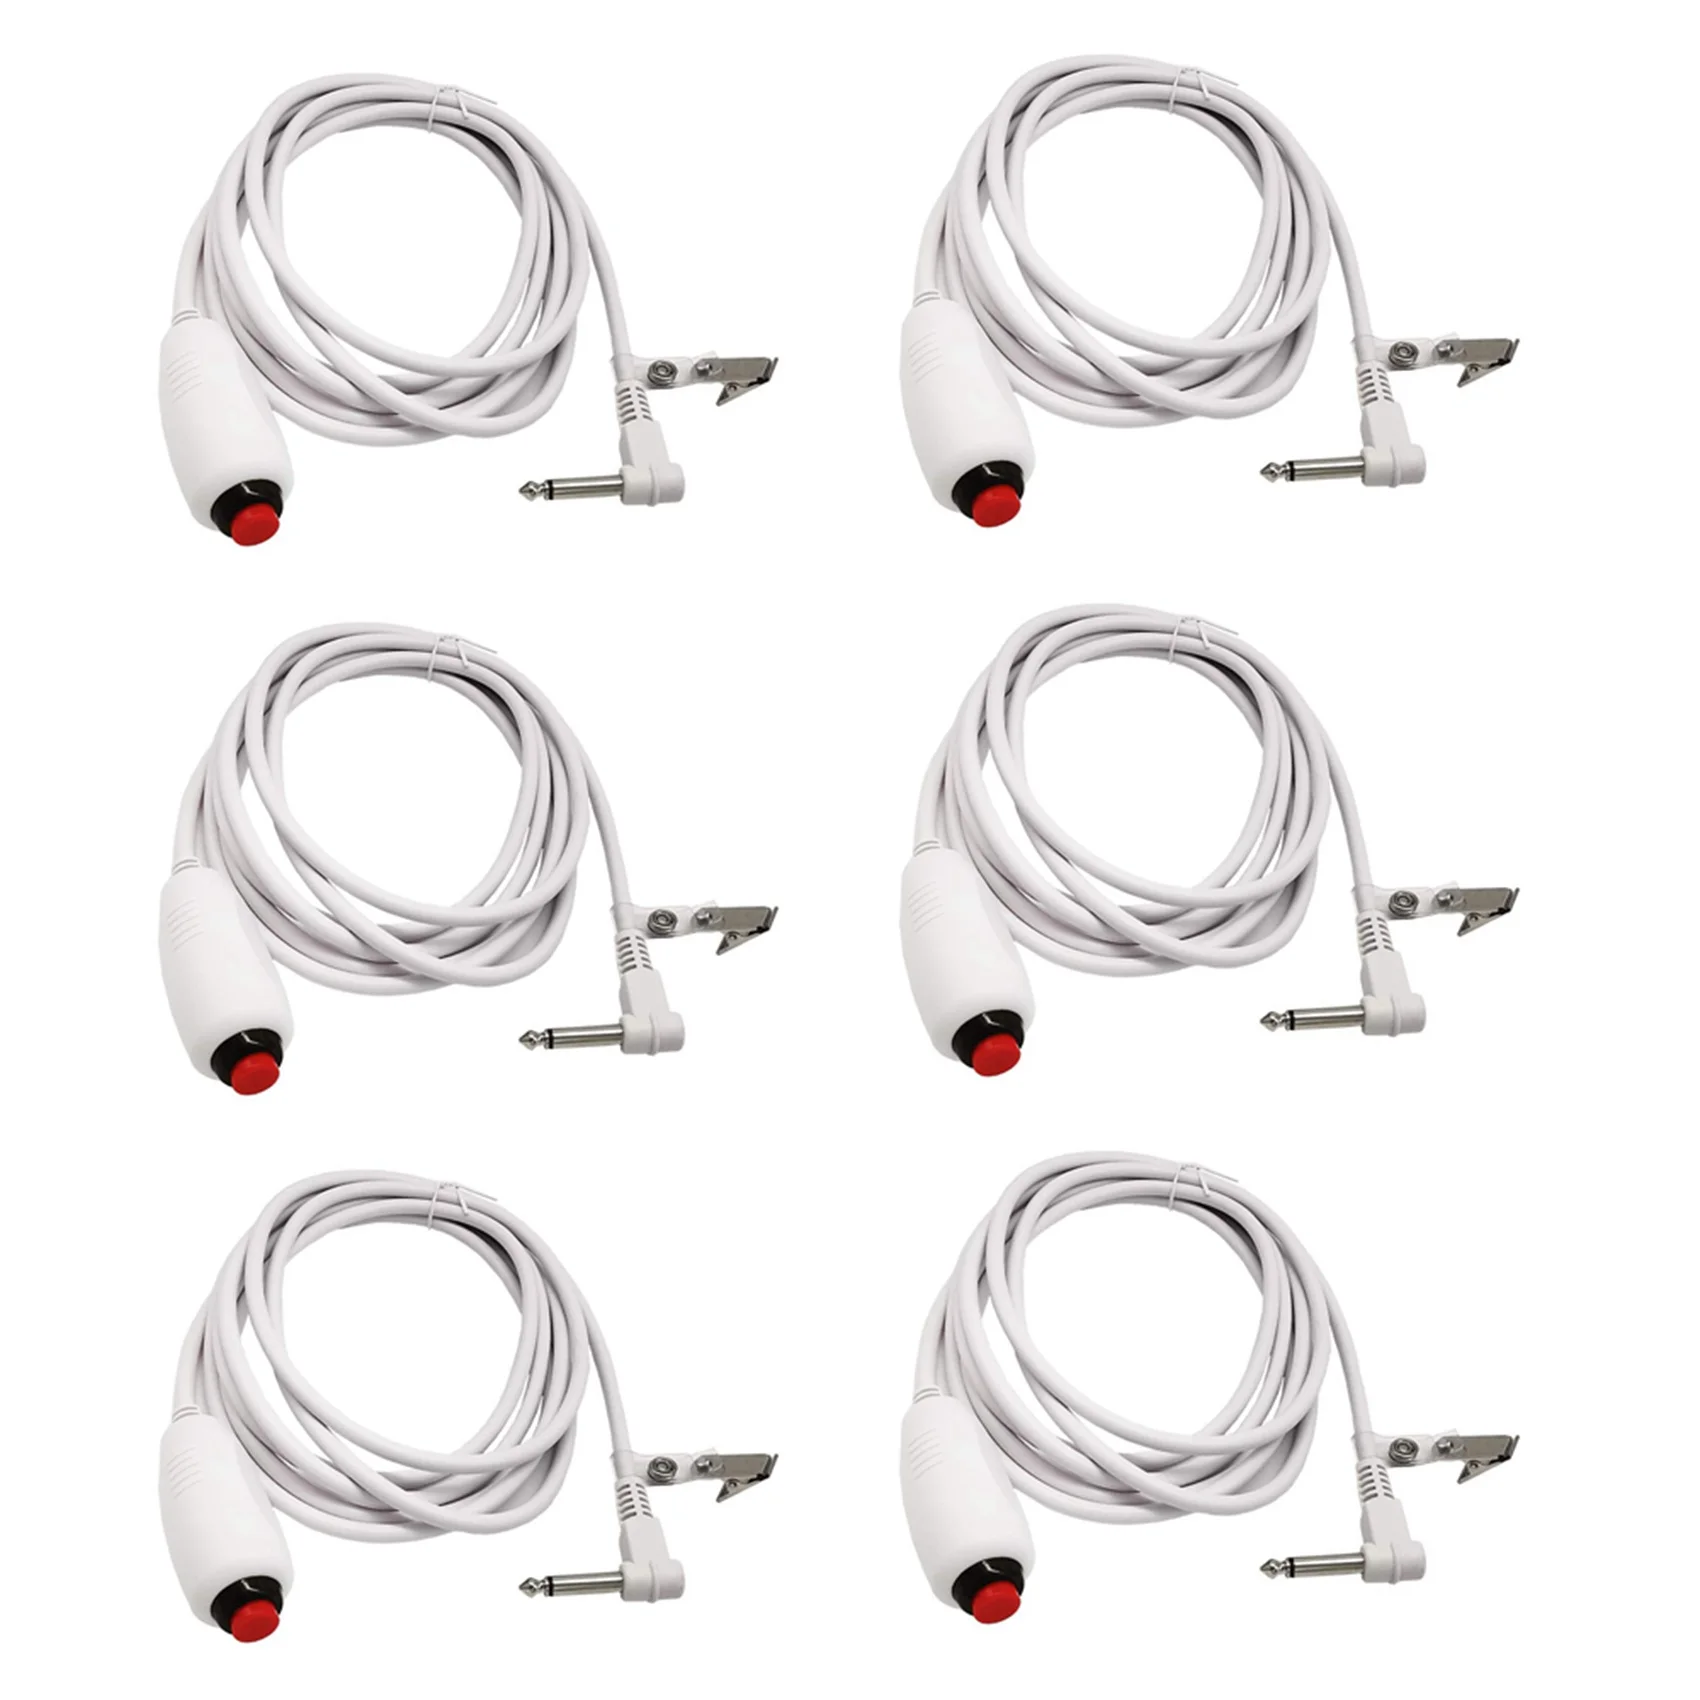 

6X Nurse Call Cable 6.35mm Line Nurse Call Device Emergency Call Cable with Push Button Switch